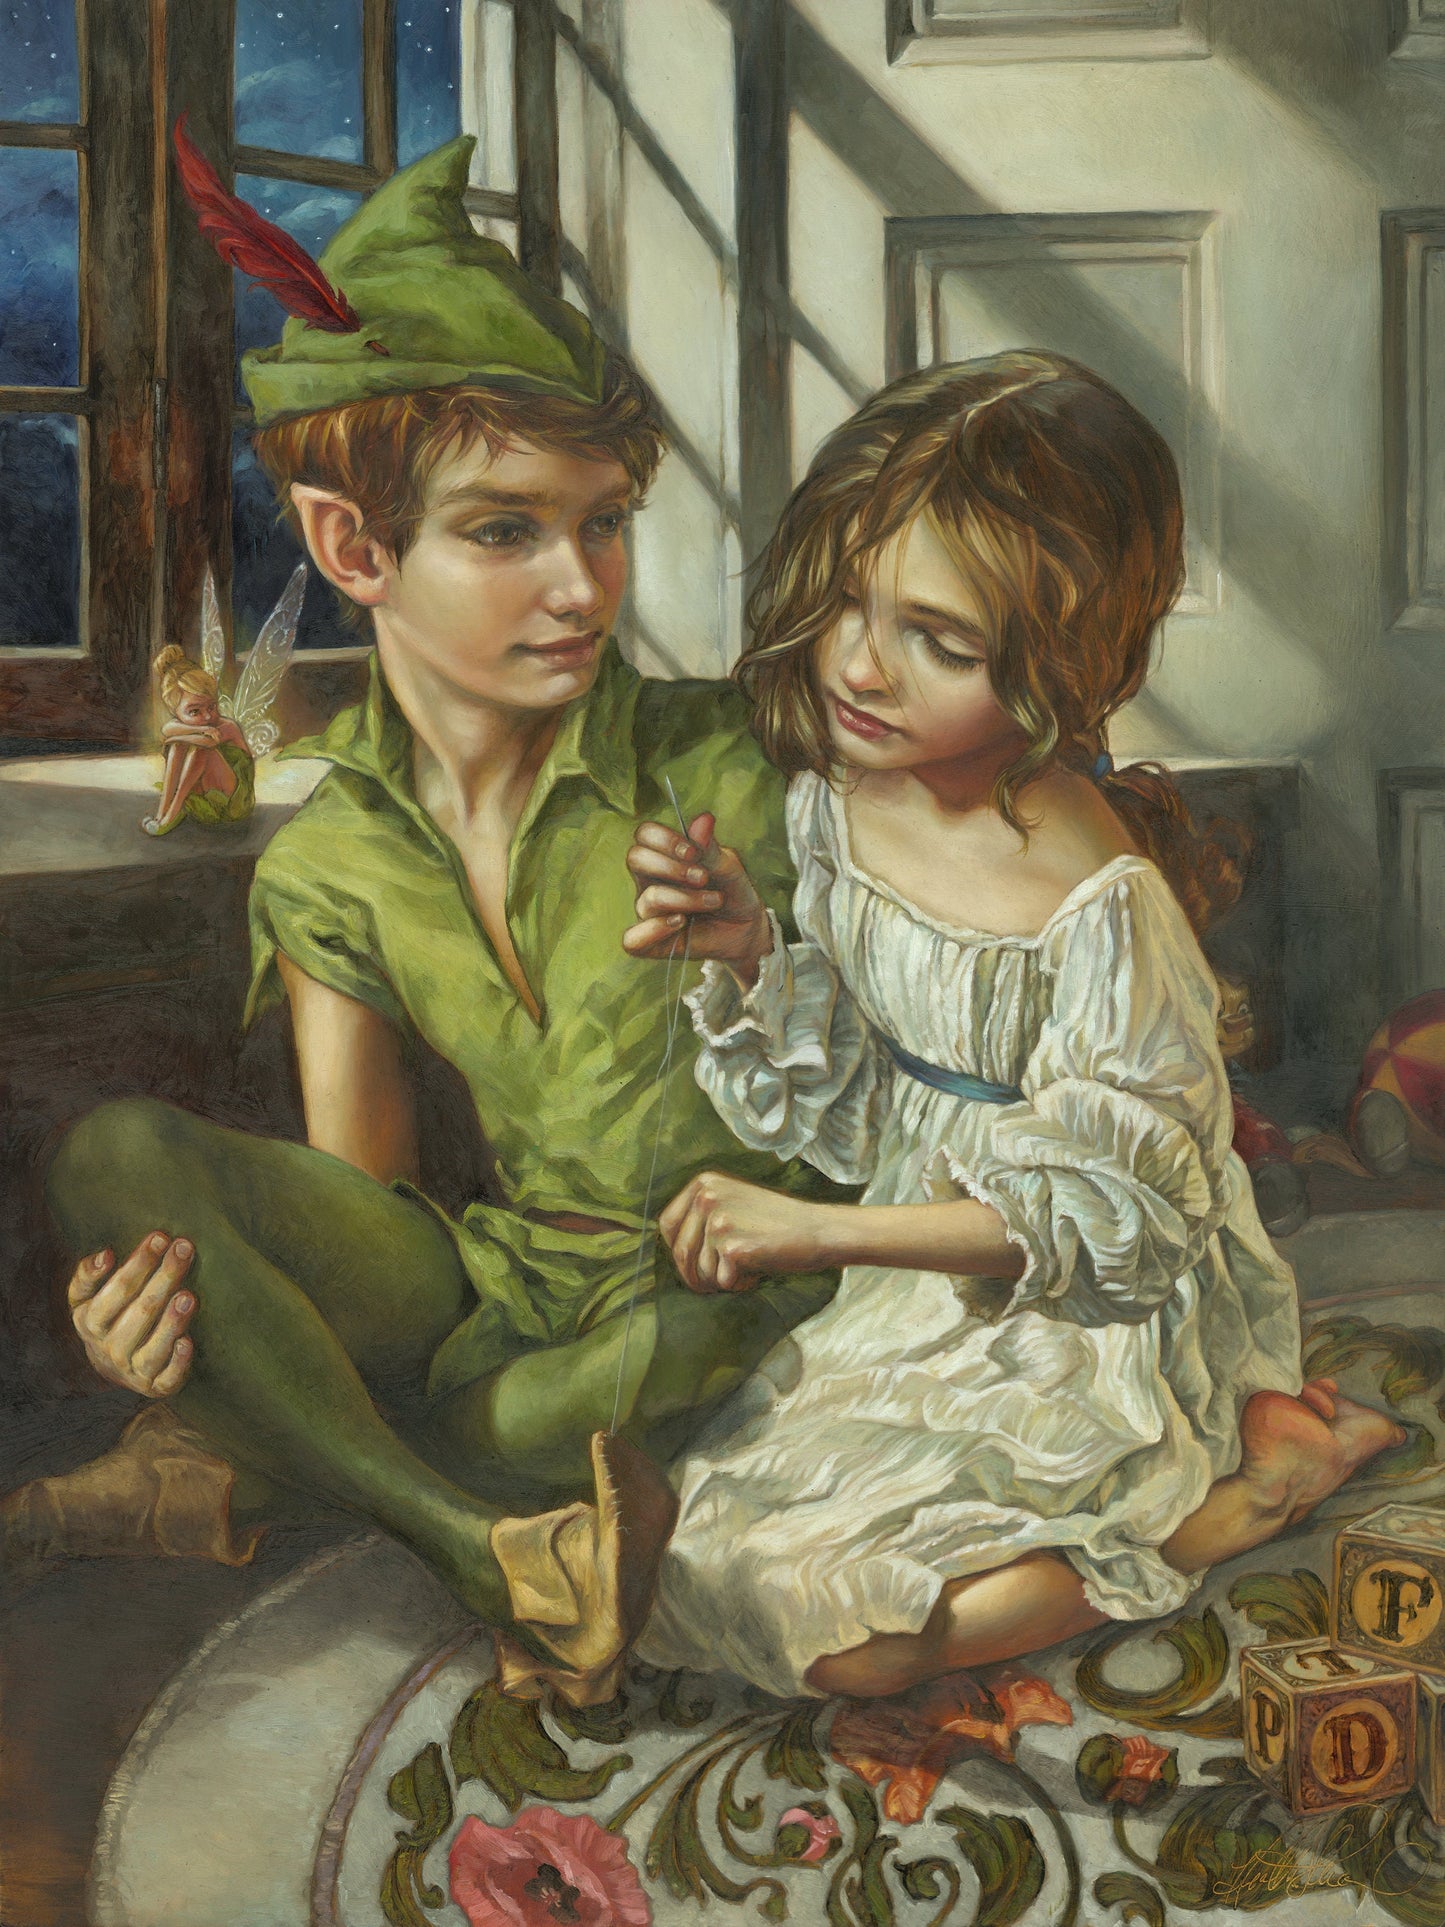 Peter Pan Walt Disney Fine Art Heather Edwards Signed Limited Edition of 195 Print on Canvas "Sewn to His Shadow"